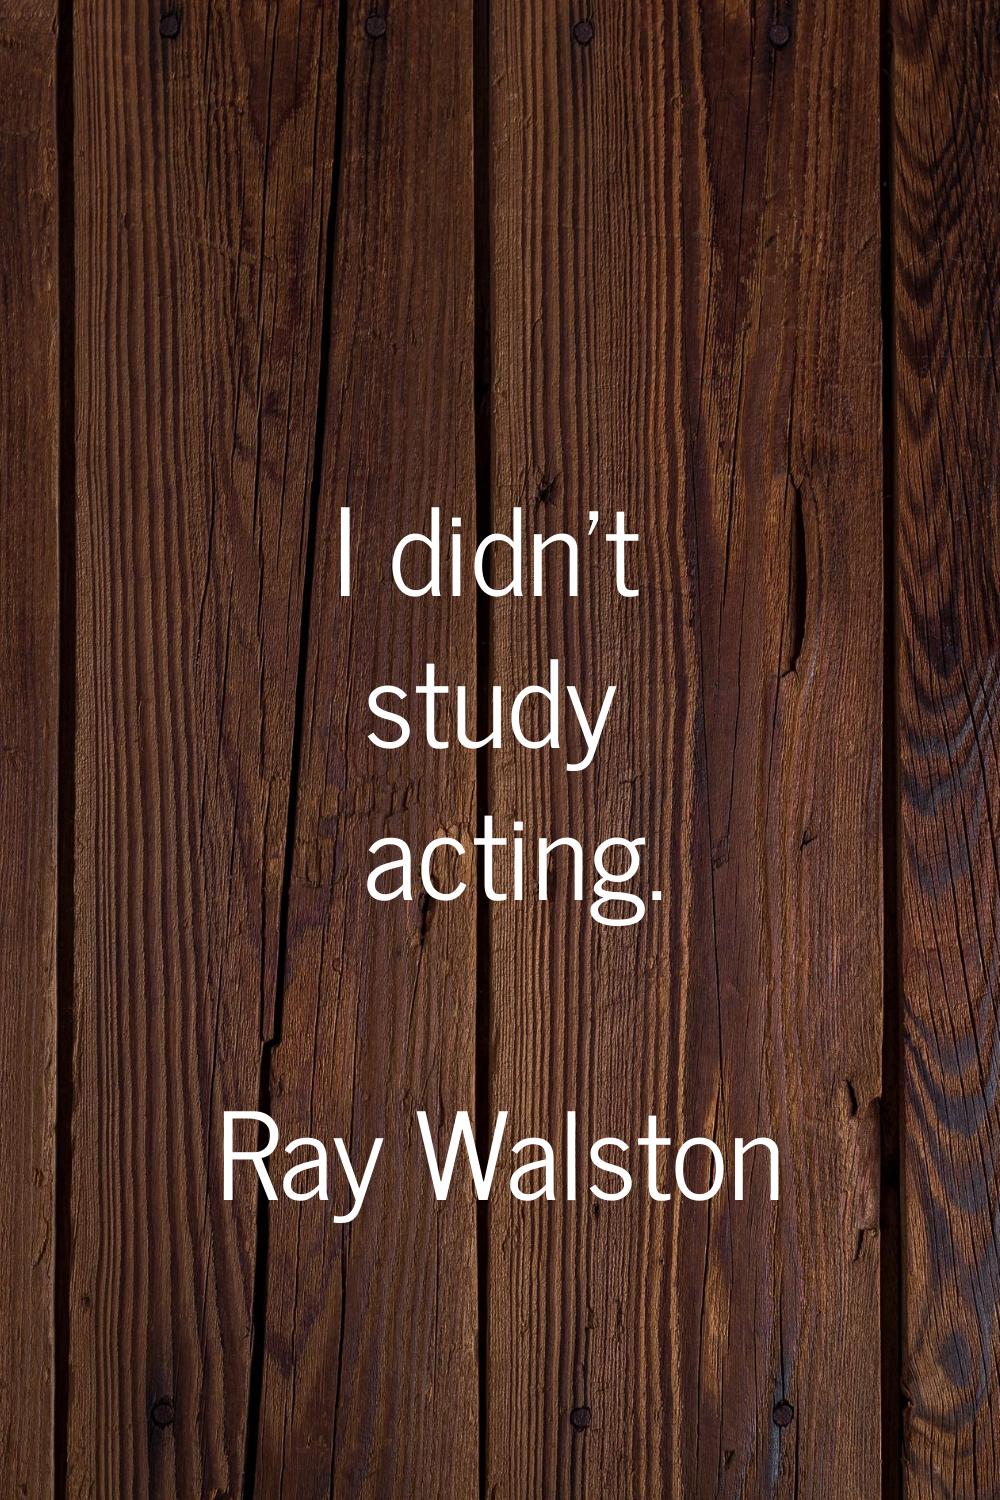 I didn't study acting.